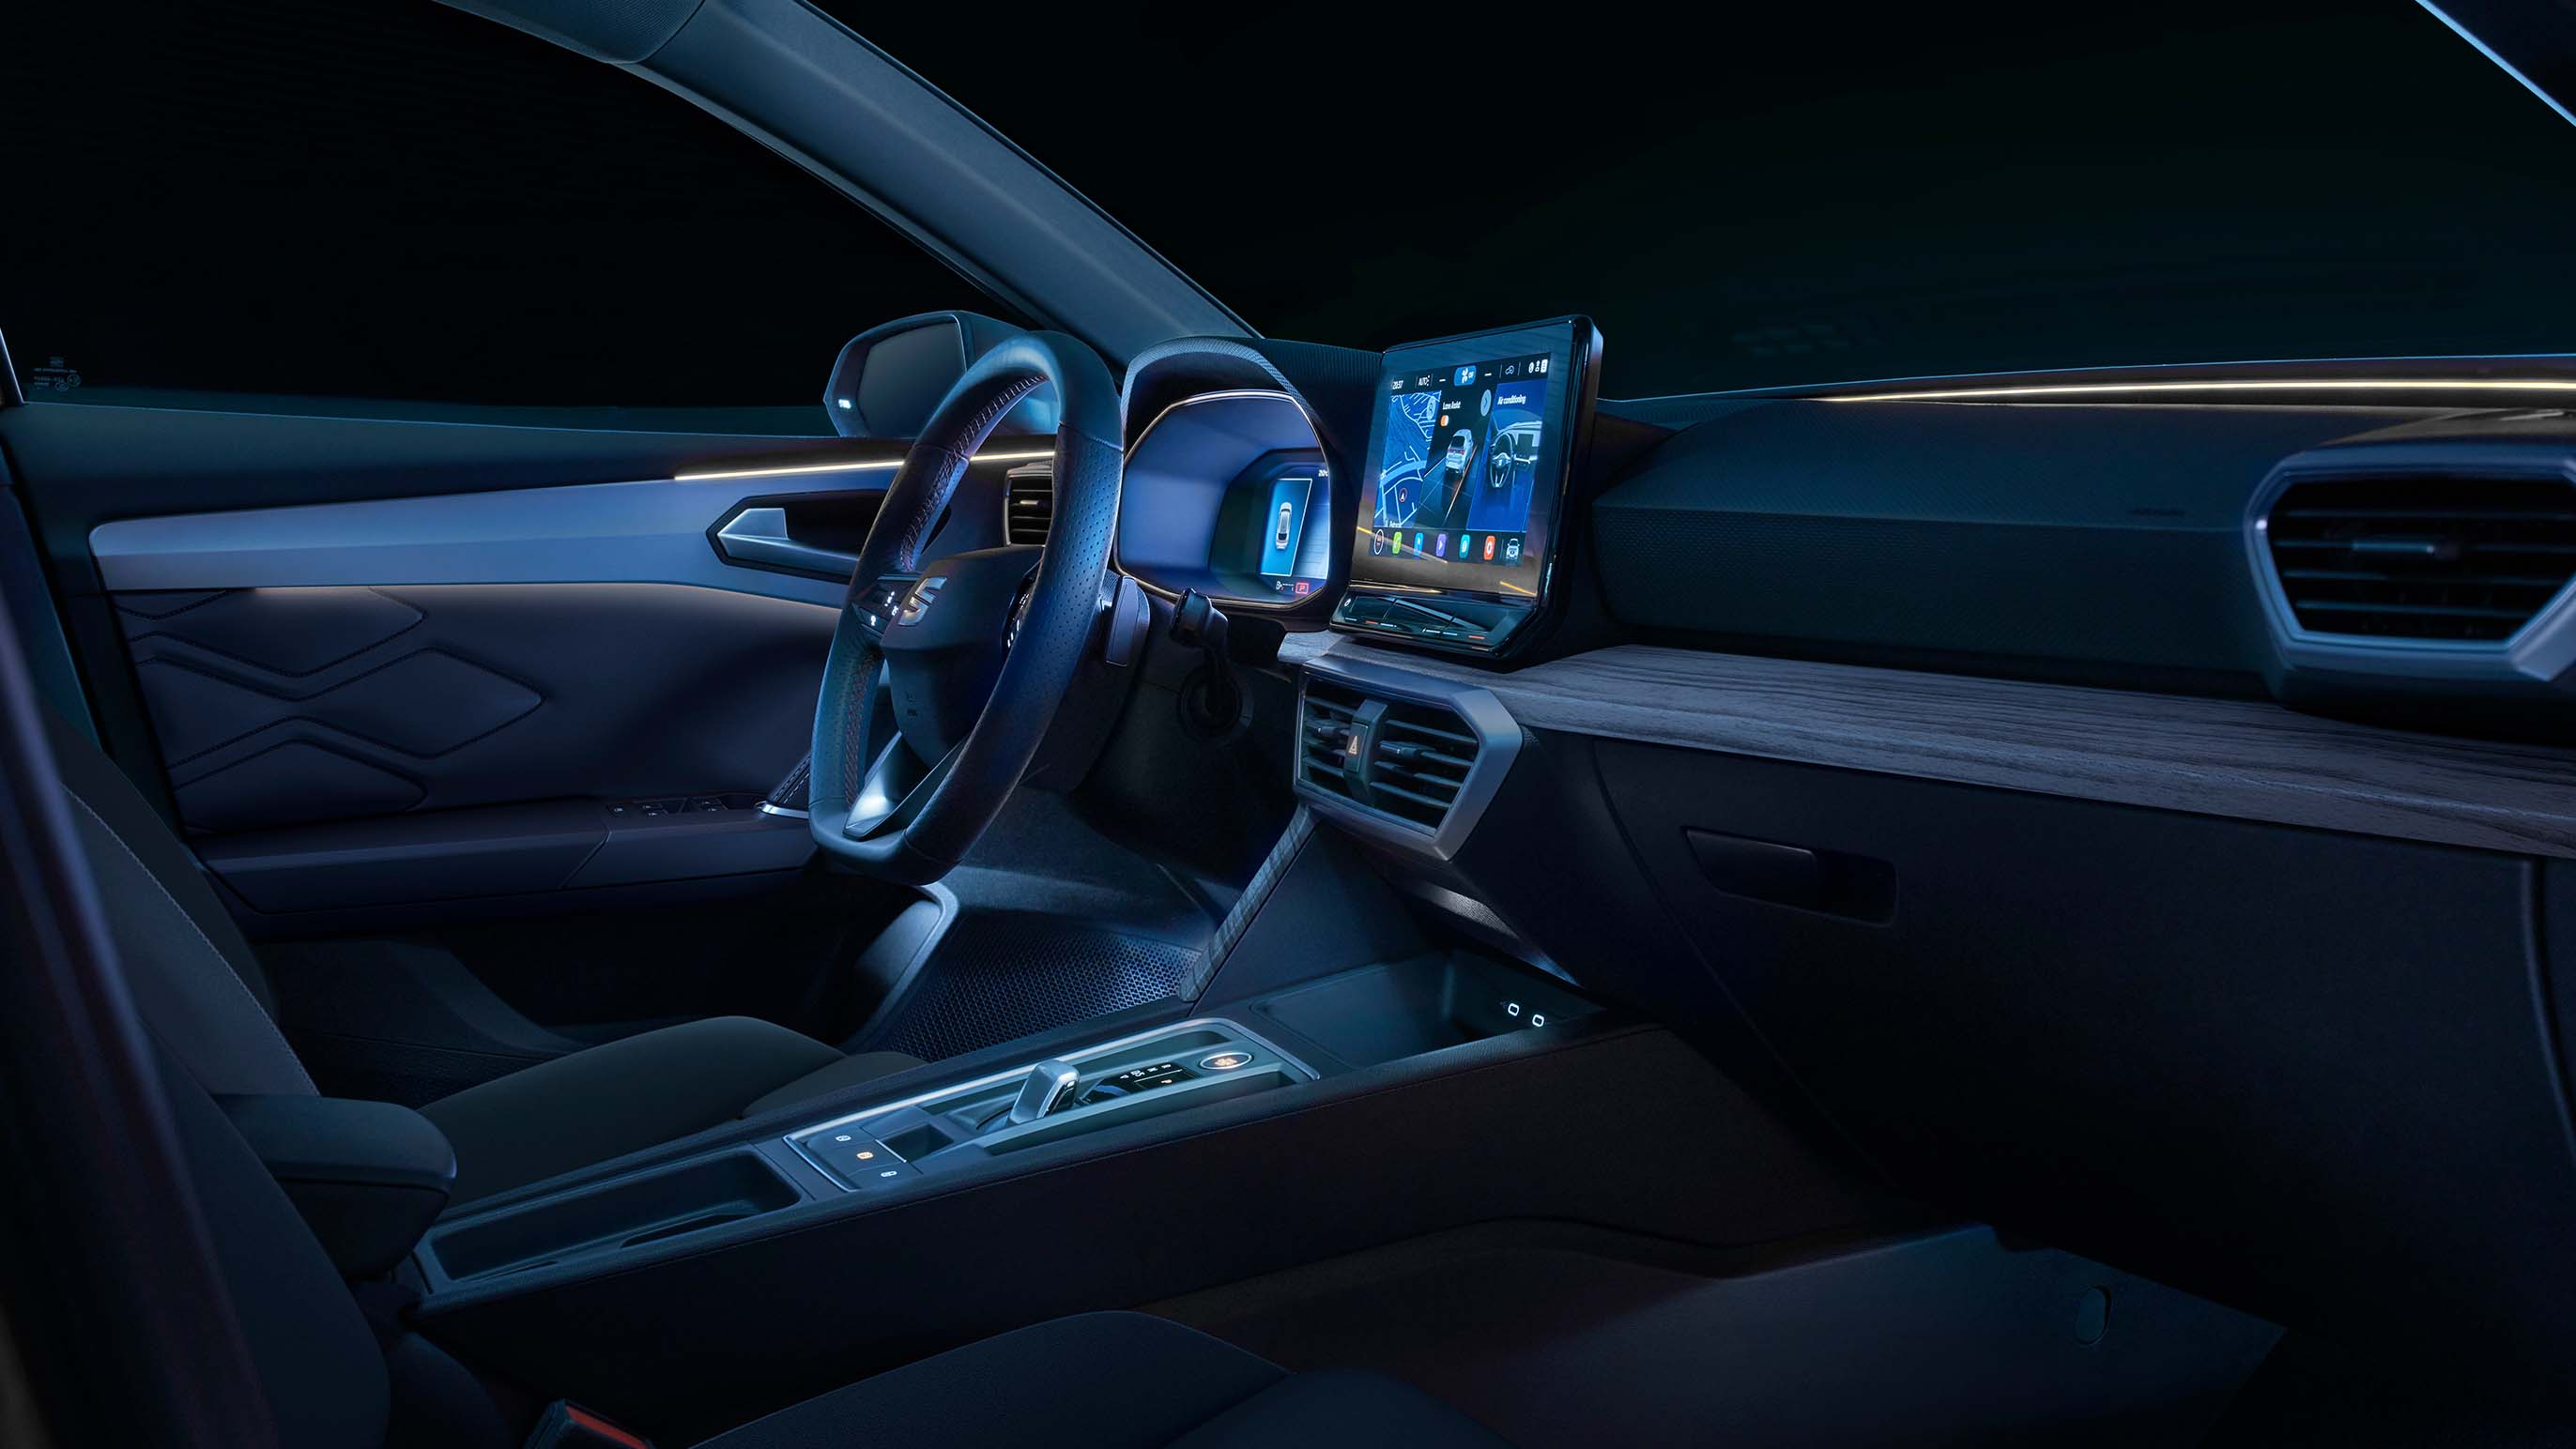 seat leon interior view of the dashboard and ambient light